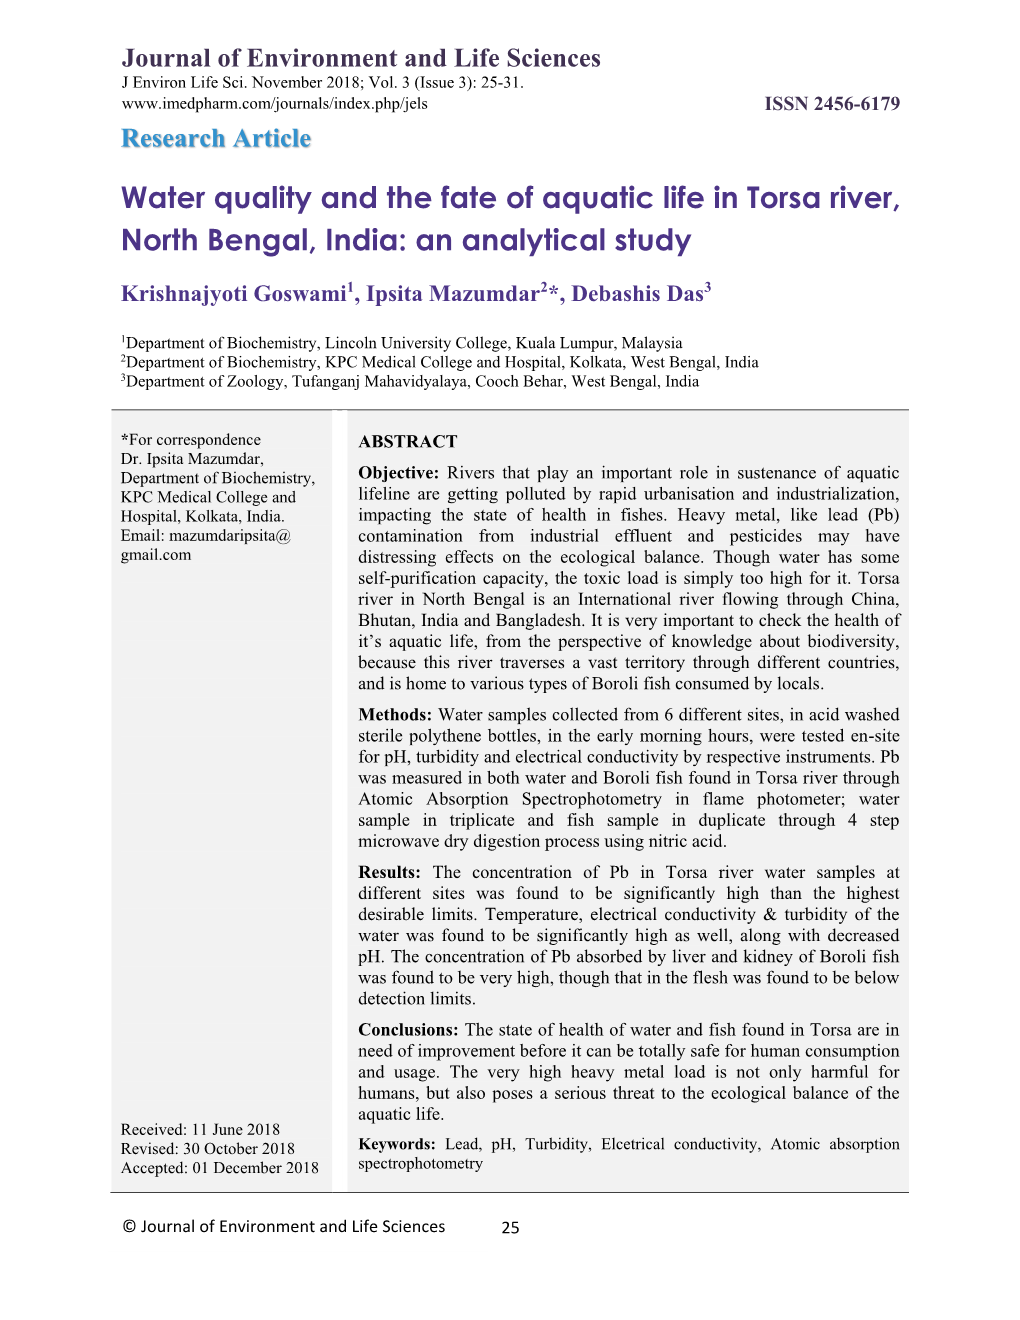 Water Quality and the Fate of Aquatic Life in Torsa River, North Bengal, India: an Analytical Study